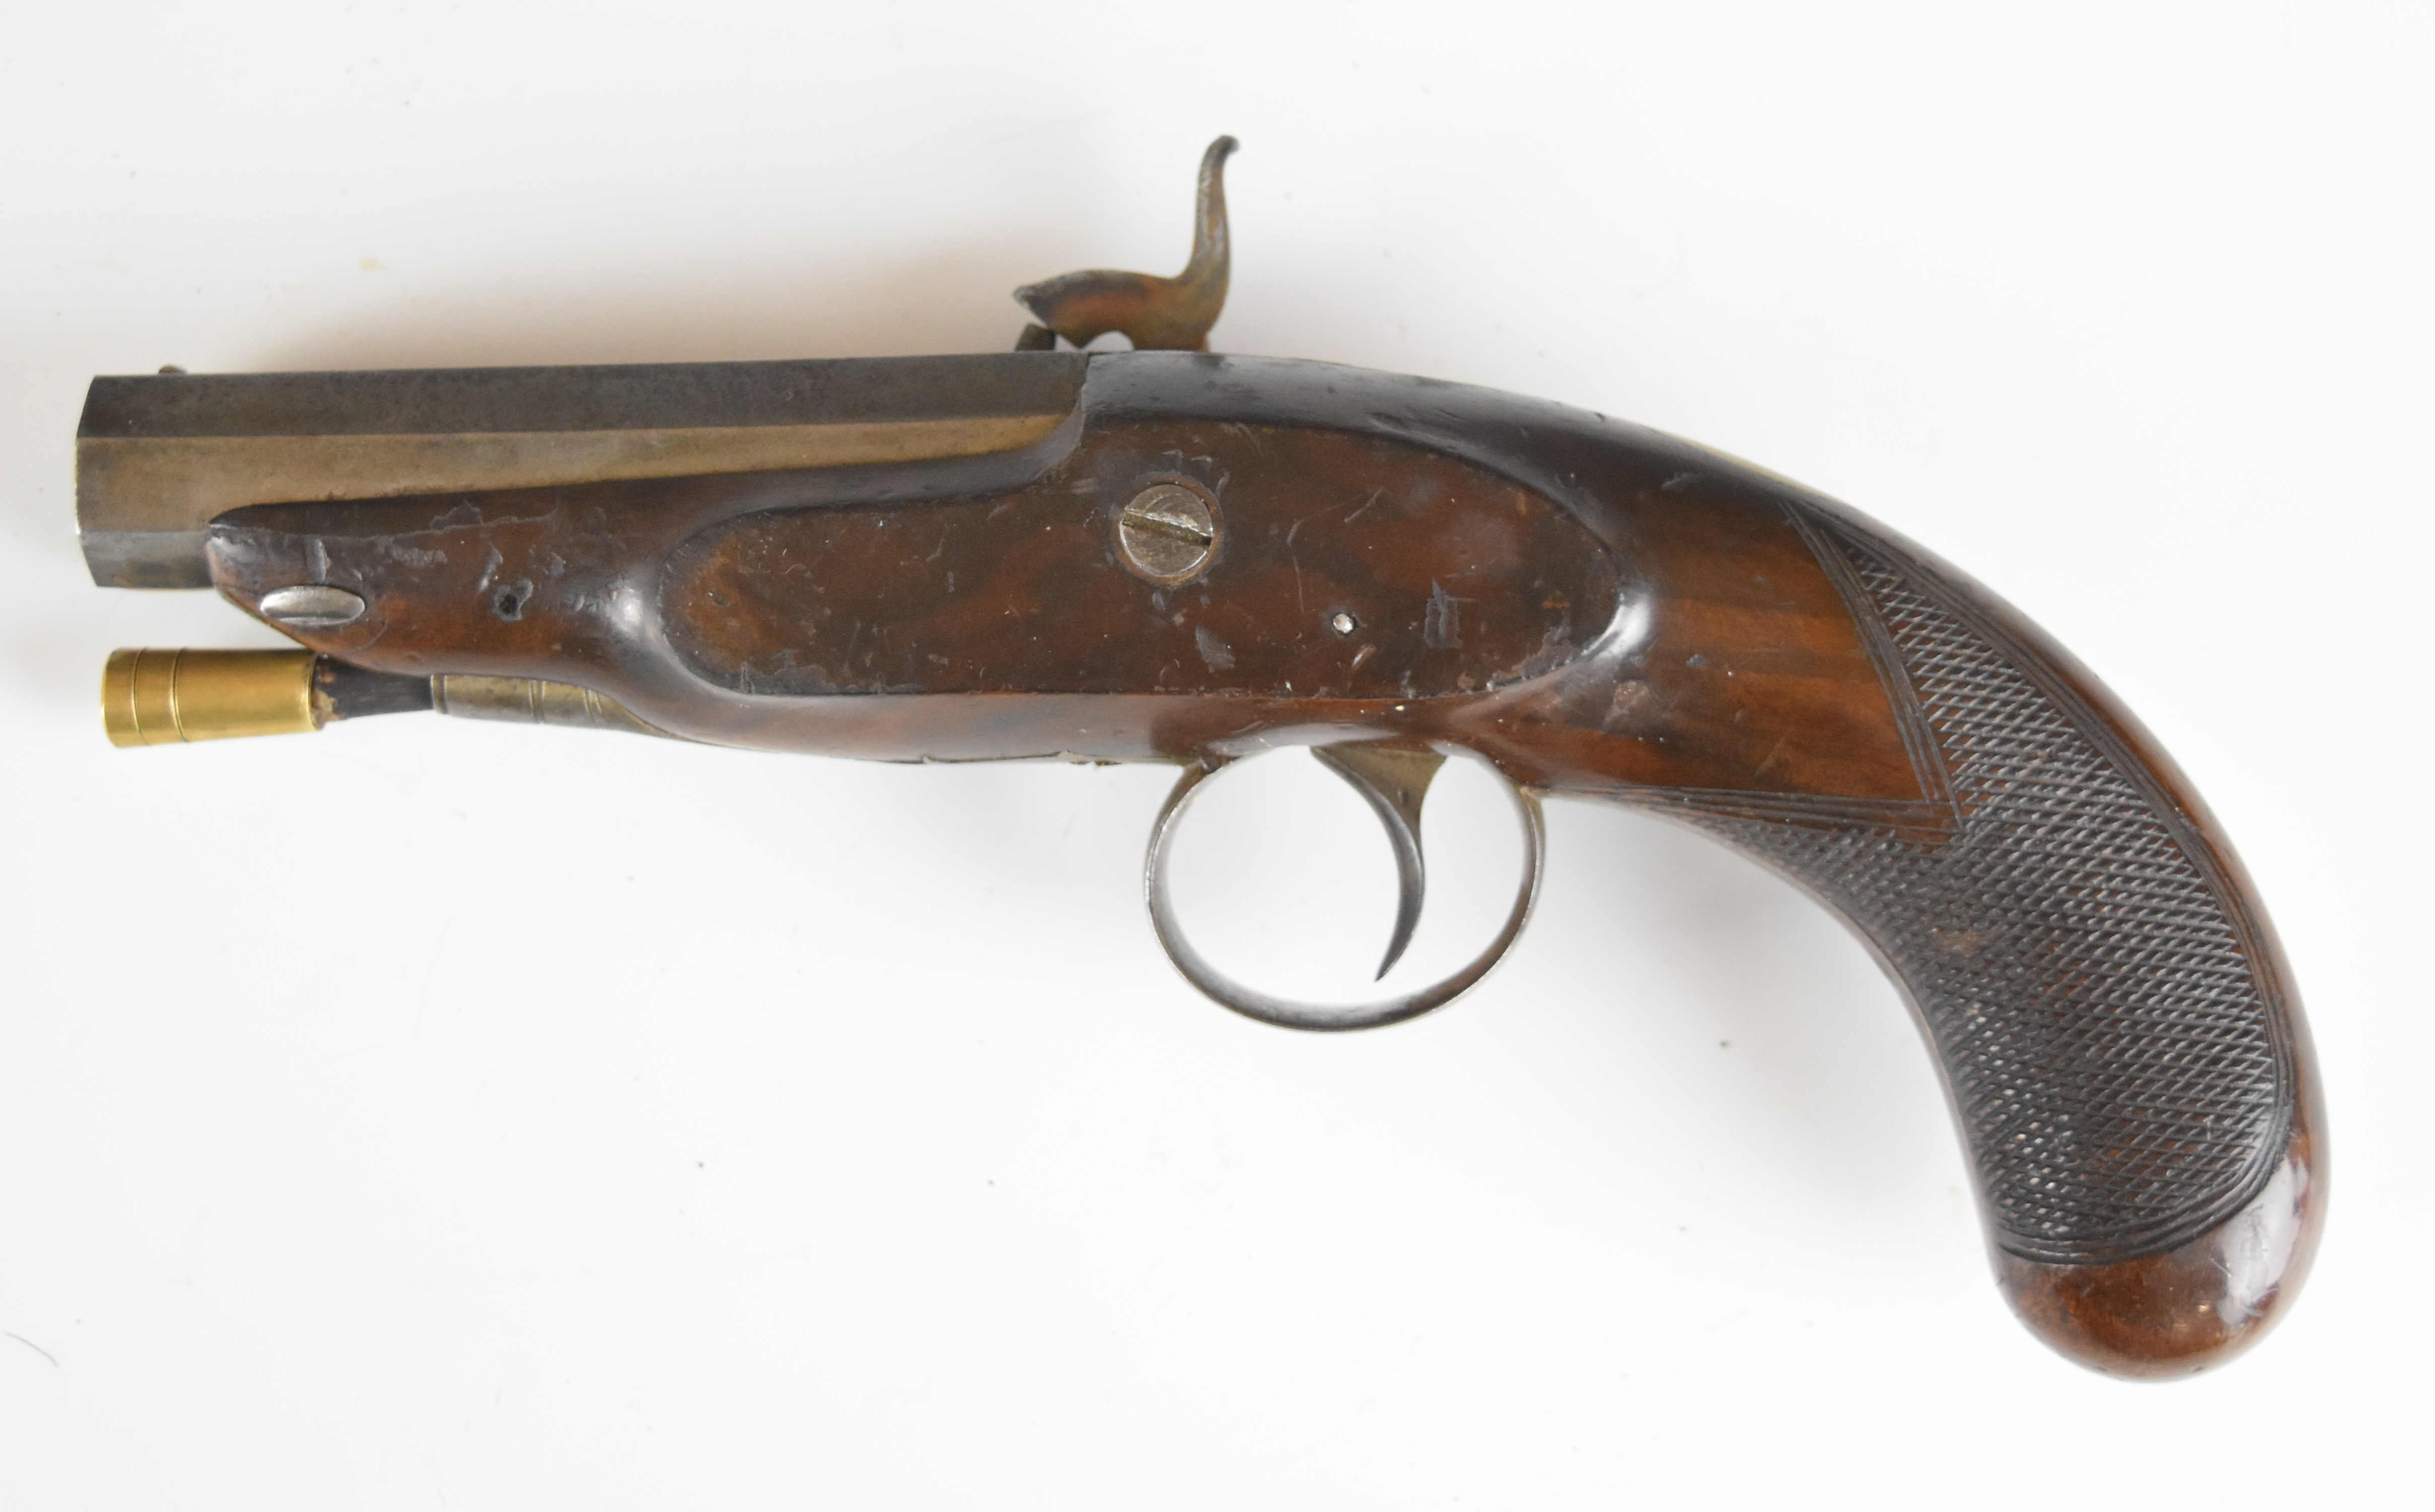 Bentley of London 36 bore percussion hammer action coat pistol with engraved lock, hammer, trigger - Image 2 of 10